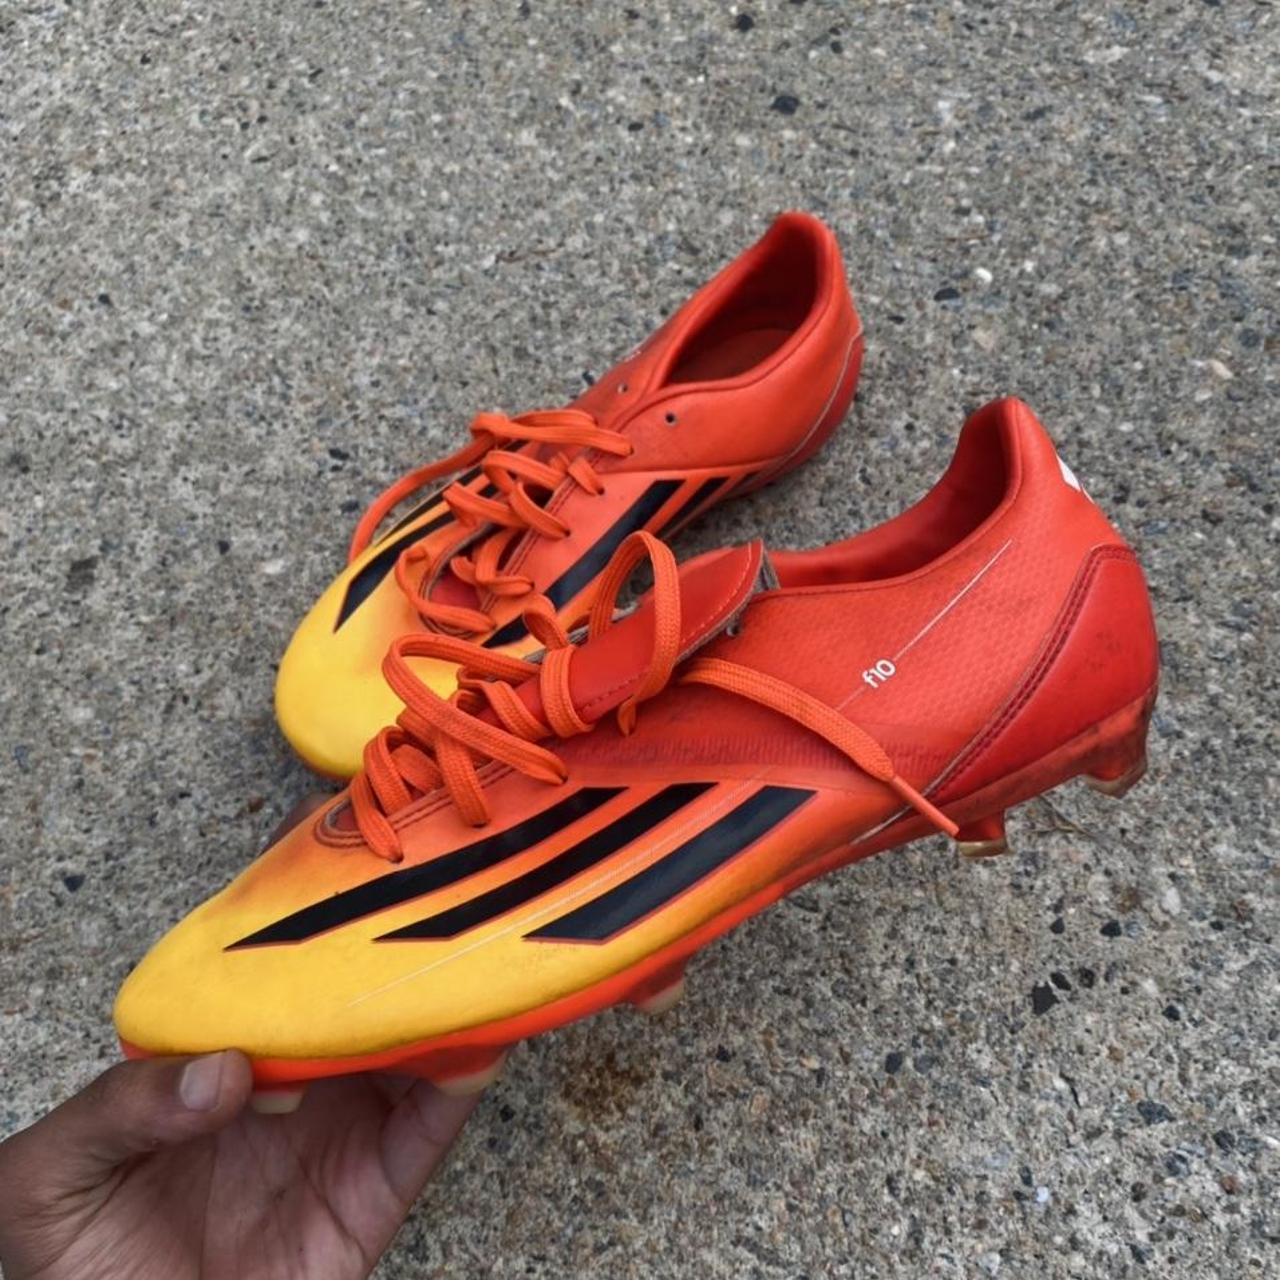 Product Image 2 - Adidas x Messi f10 fire